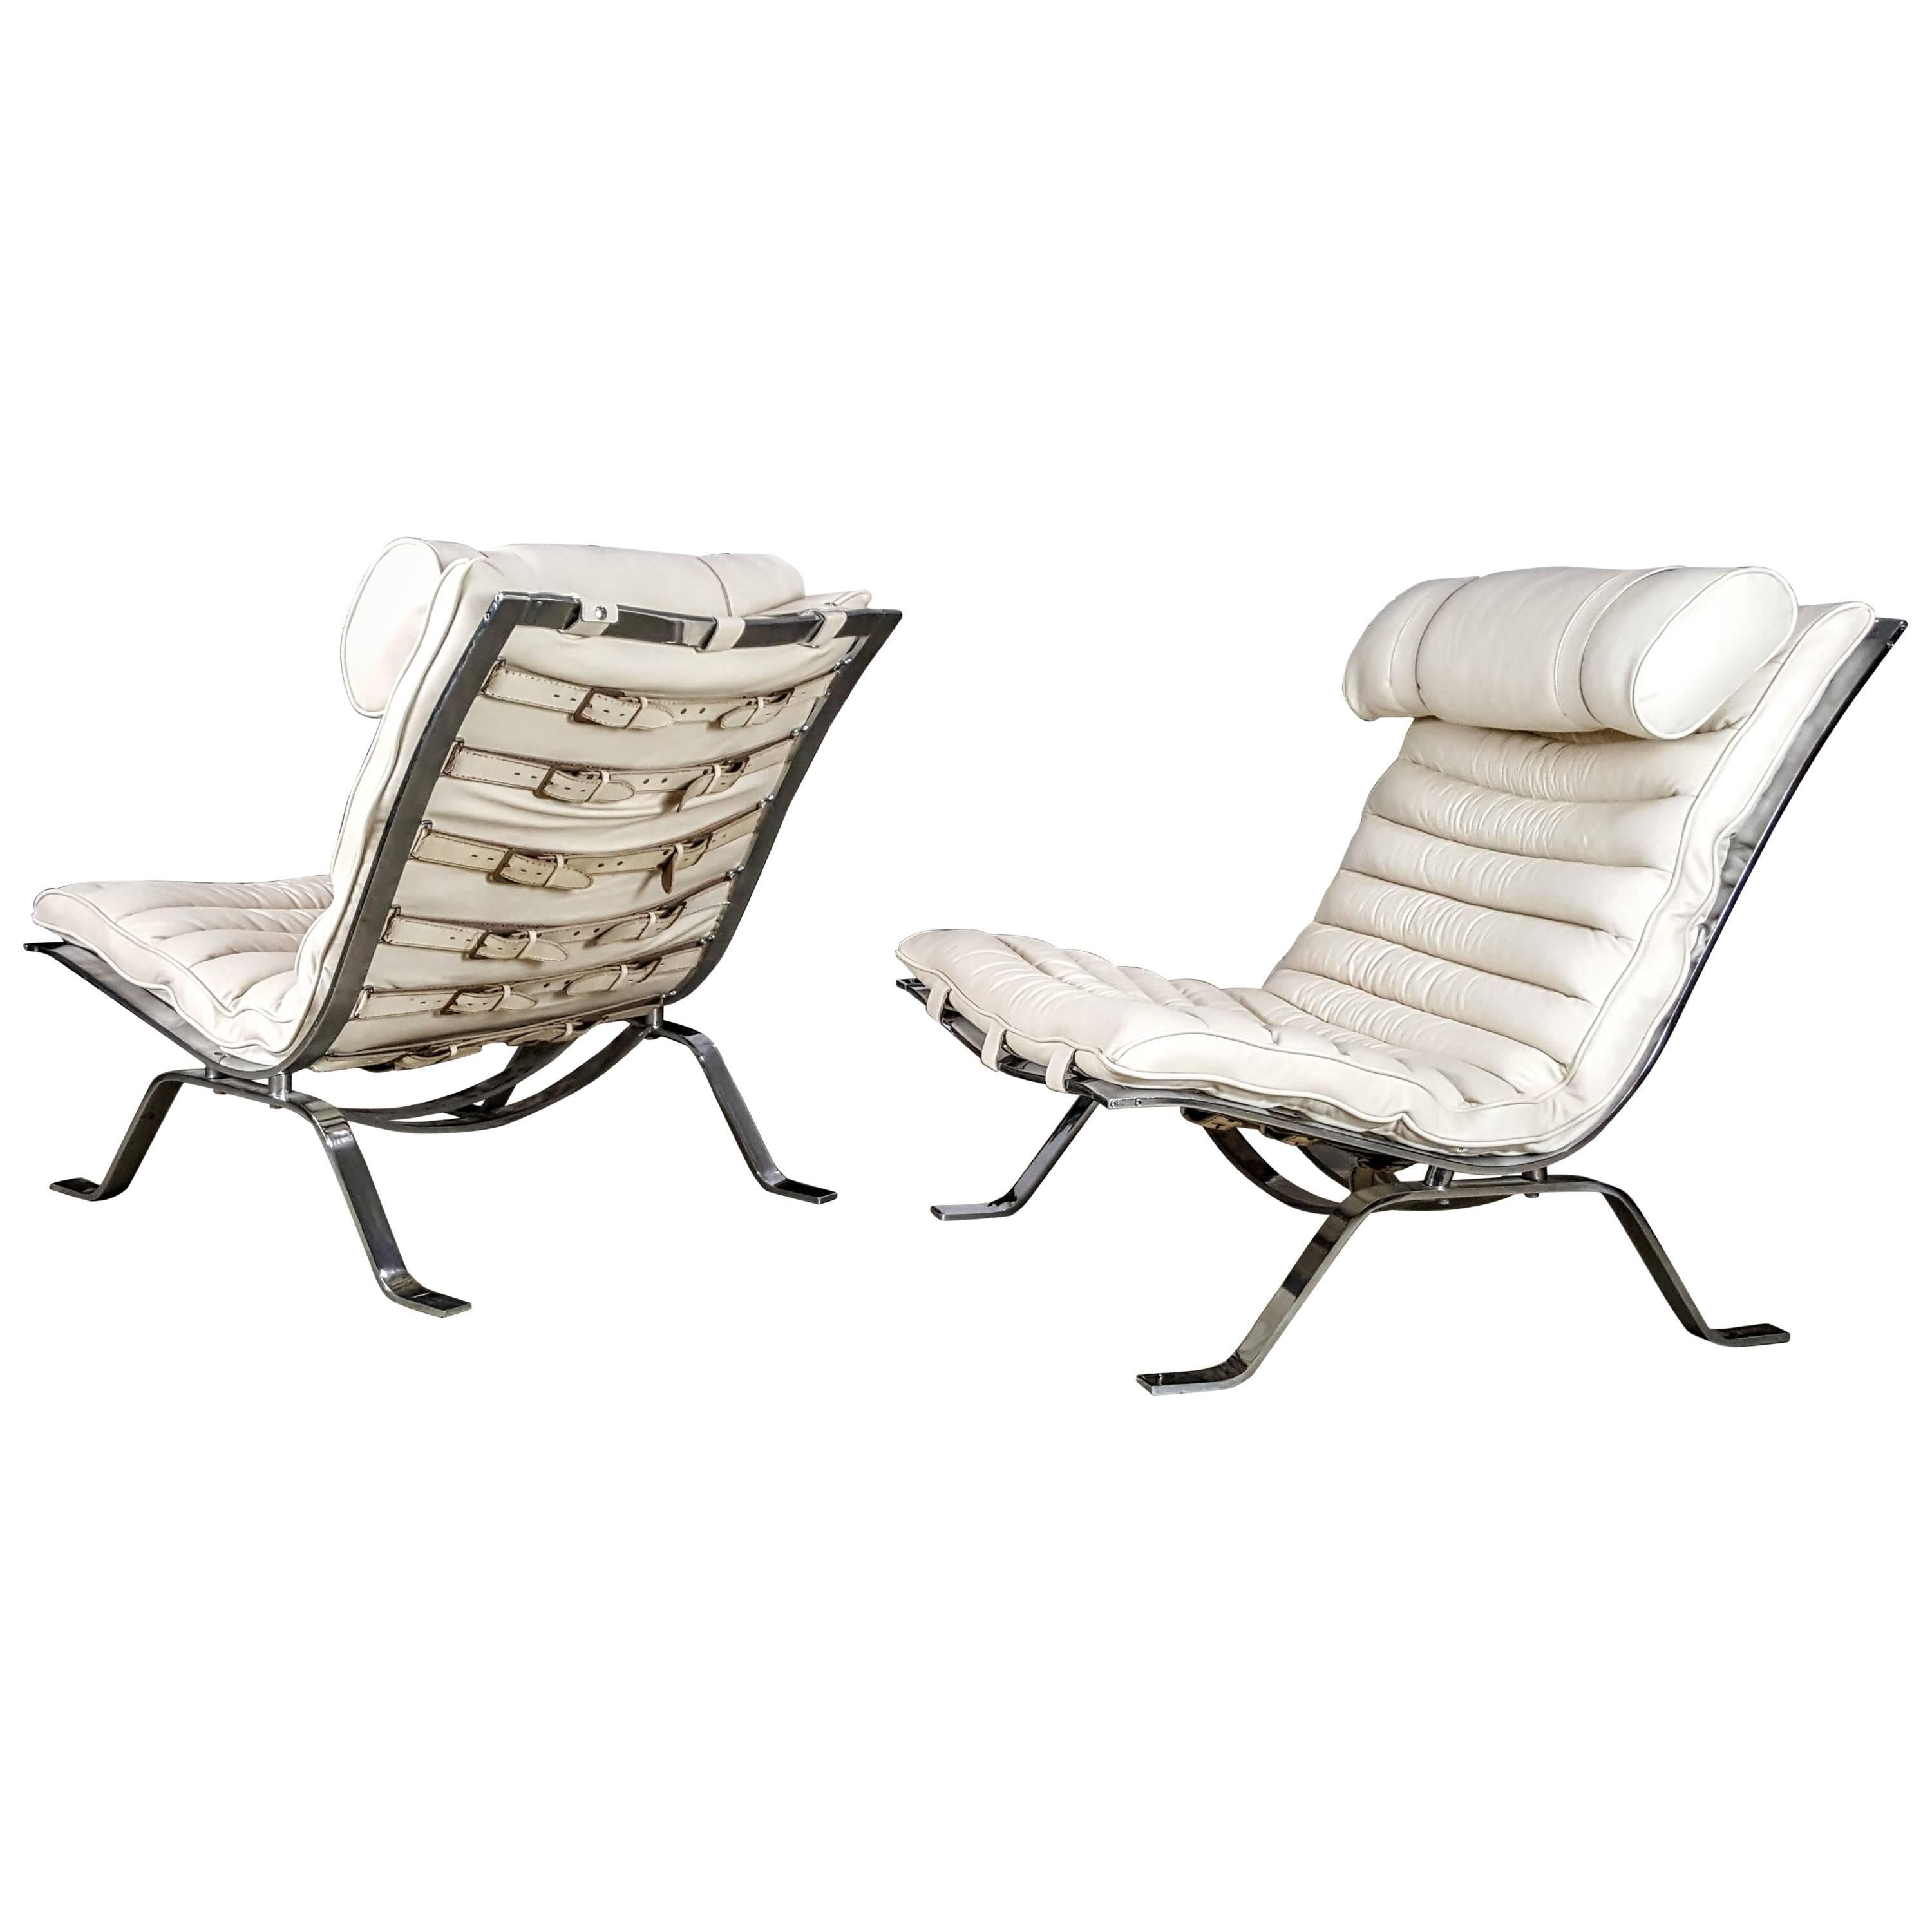 Pair of "Ari" Lounge Chairs by Arne Norell, Sweden, 1970s